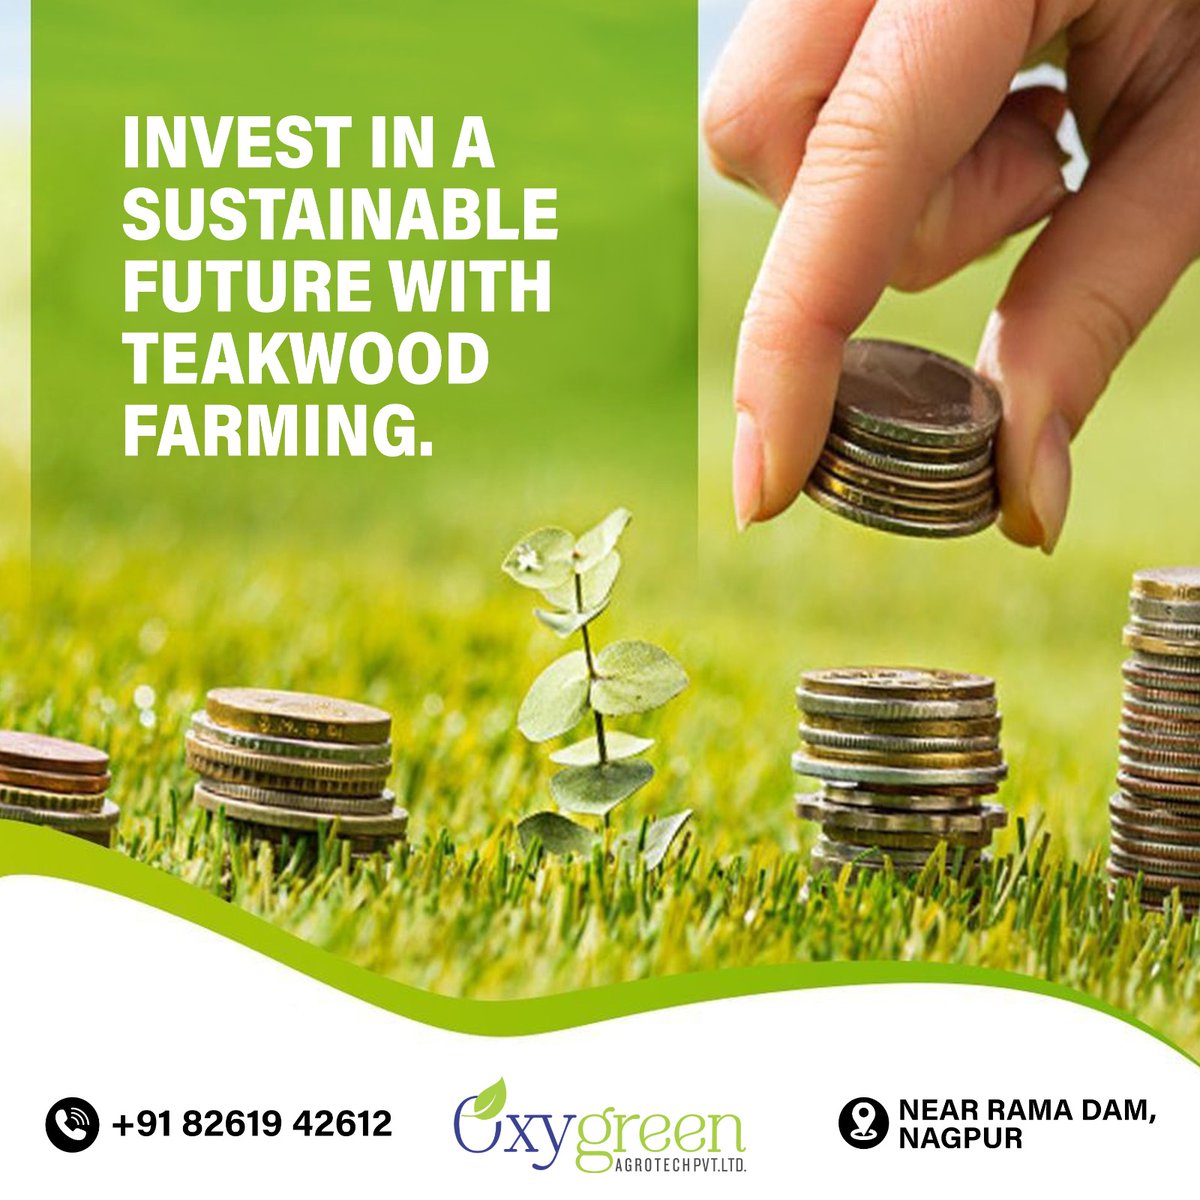 Investing in this #sustainable #asset promotes #responsible land use with #assetappreciation.

Join us in making a #meaningful investment with #TaxFree returns

👇Contact
☎8267942612

#InvestingForGood #SustainableInvesting #PositiveImpact #longterminvestment #GreenFinance